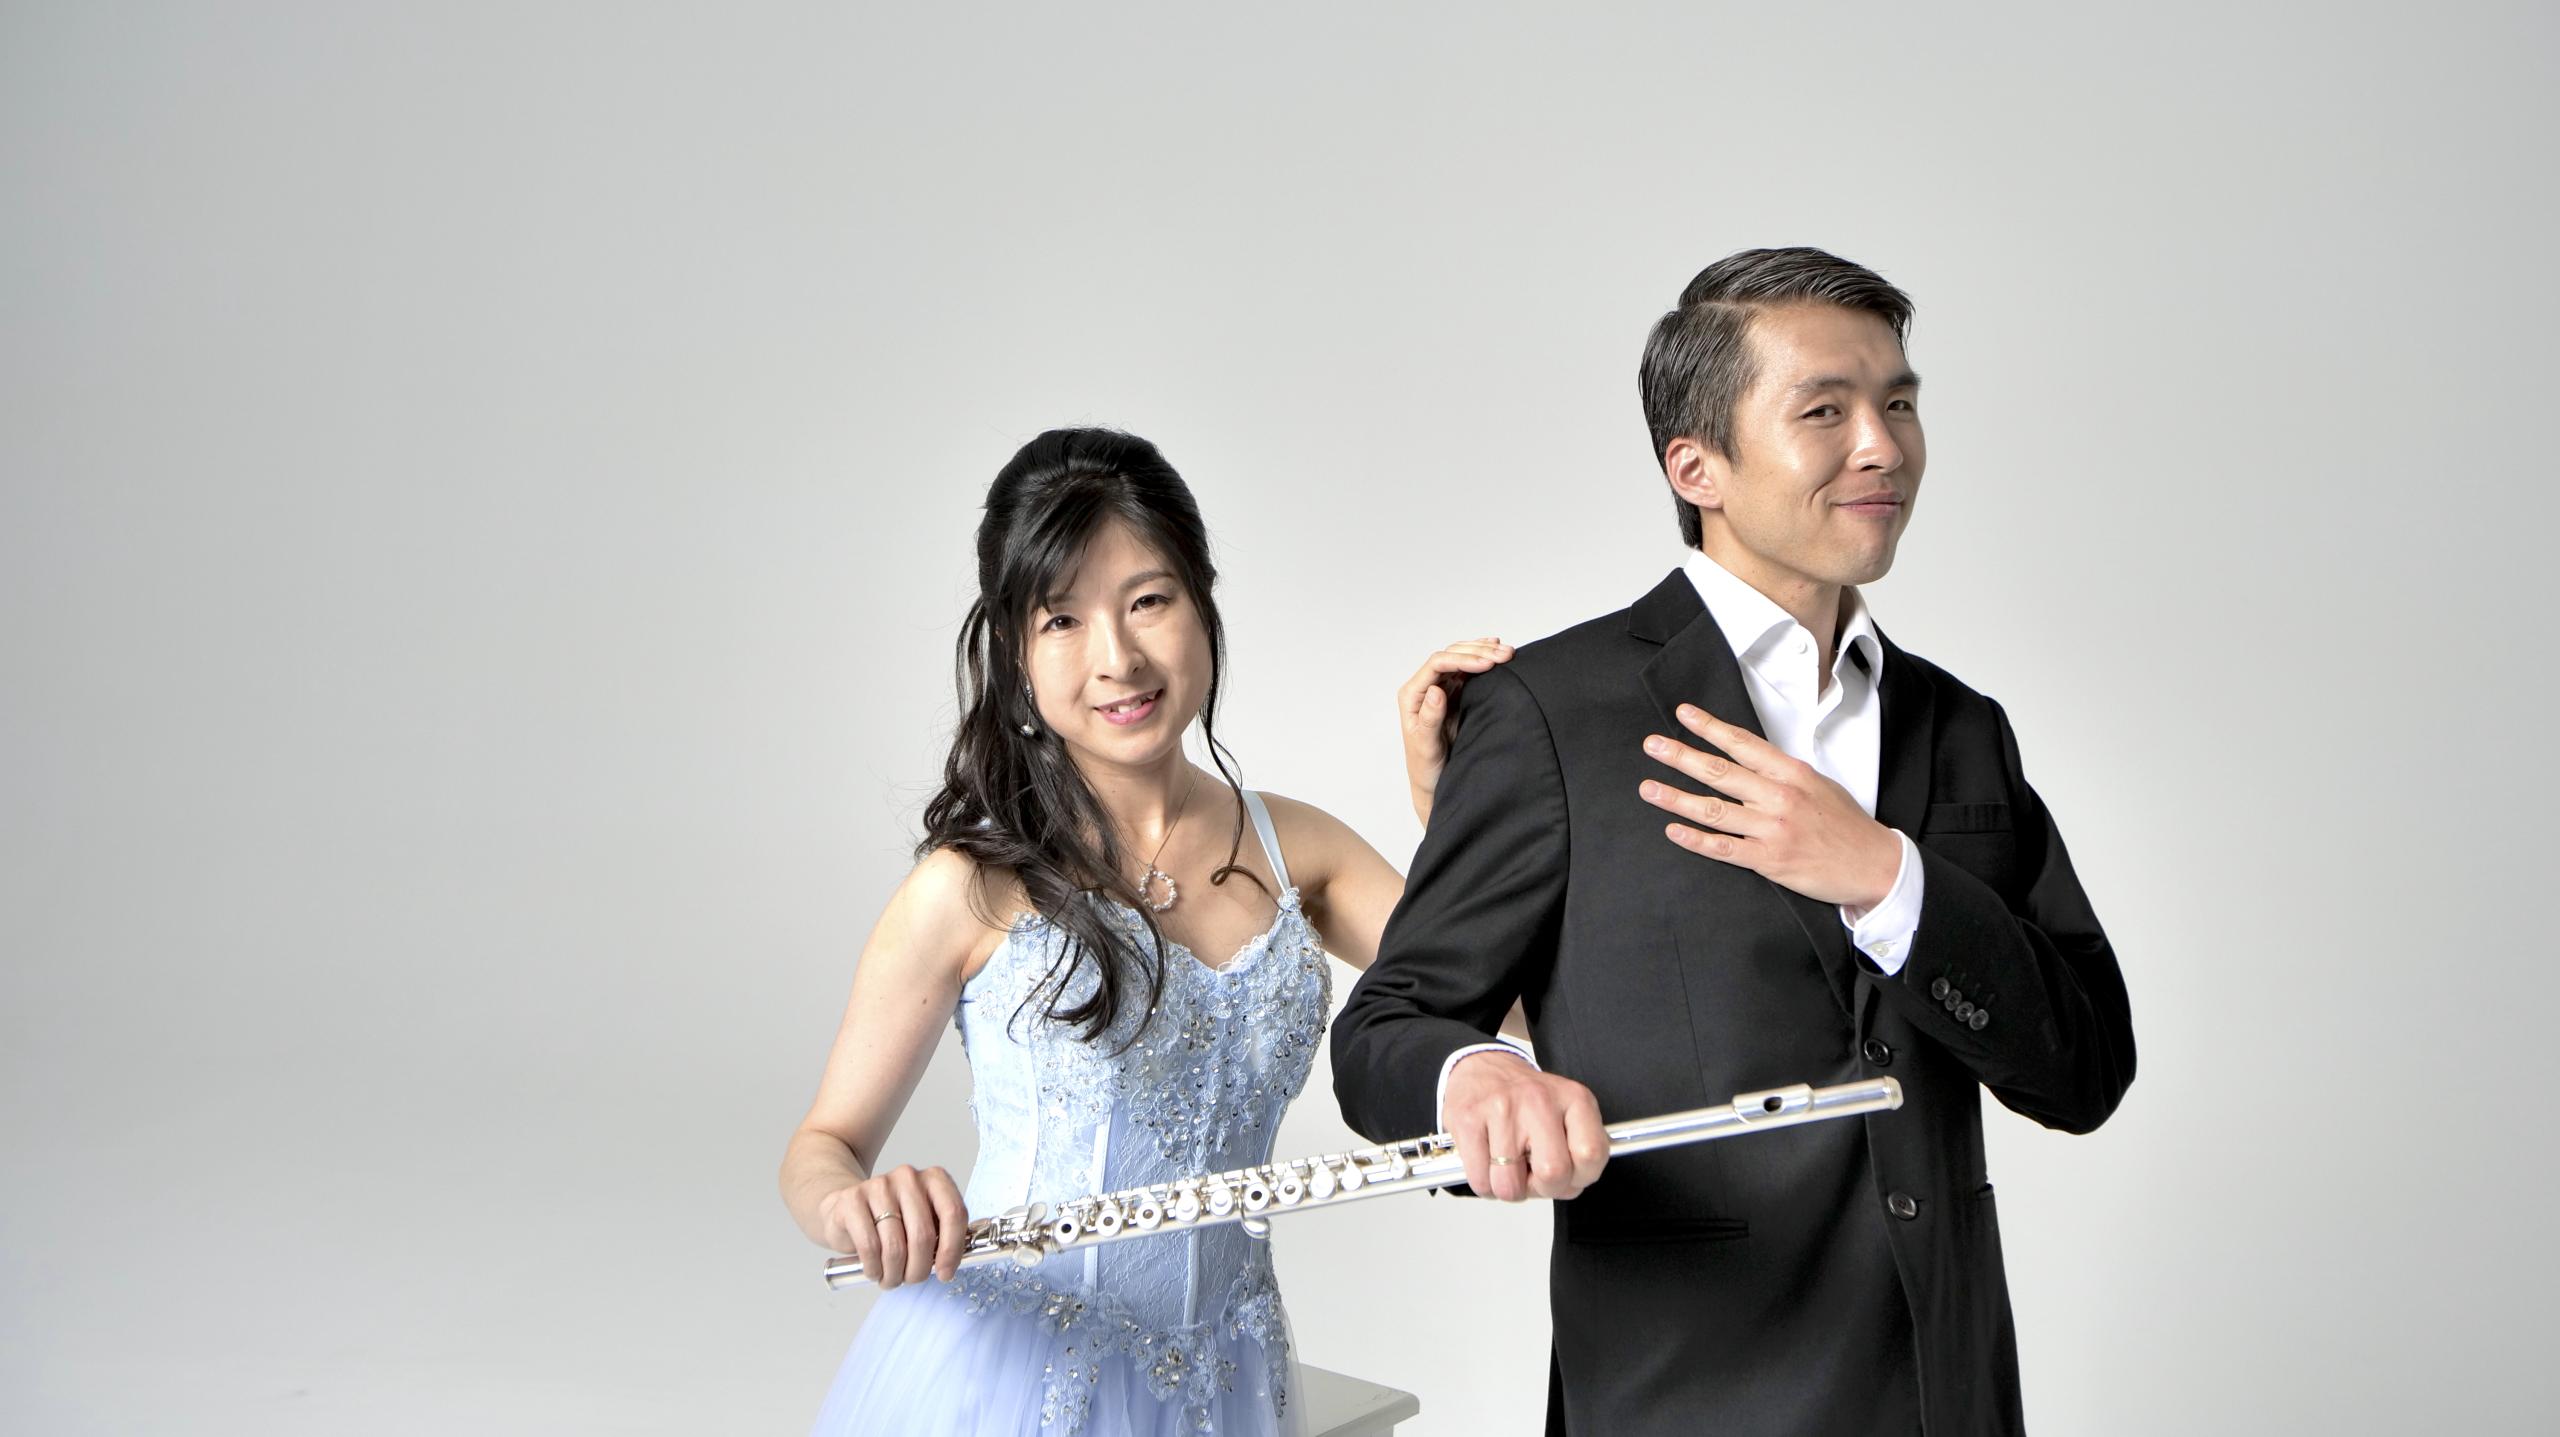 A young woman in a light blue evening dress, she puts her hand on the shoulder of a young man in a tailcoat. Both hold a flute to the front.
